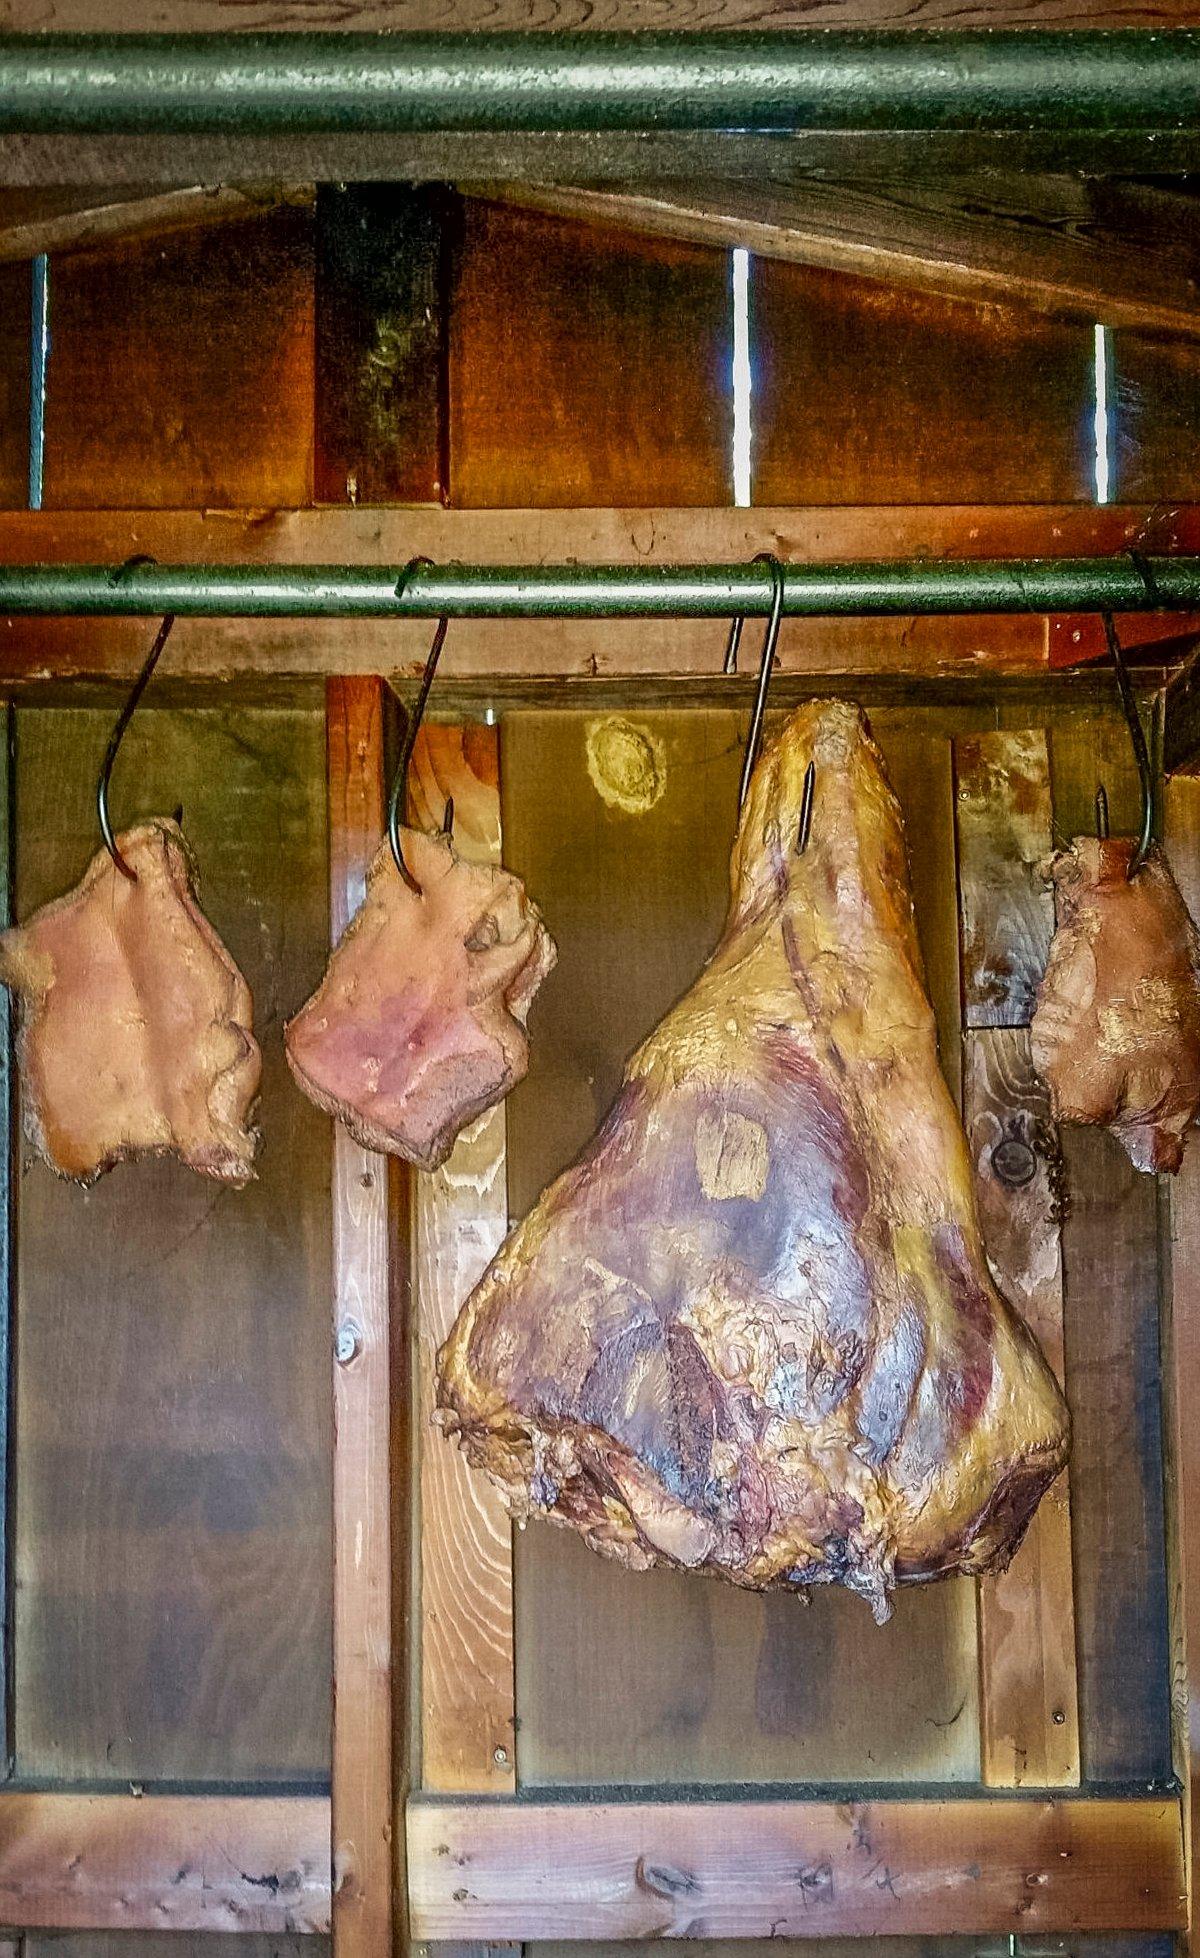 We cure our hams in a traditional salt box, then hang in the smokehouse for cold smoking before drying.